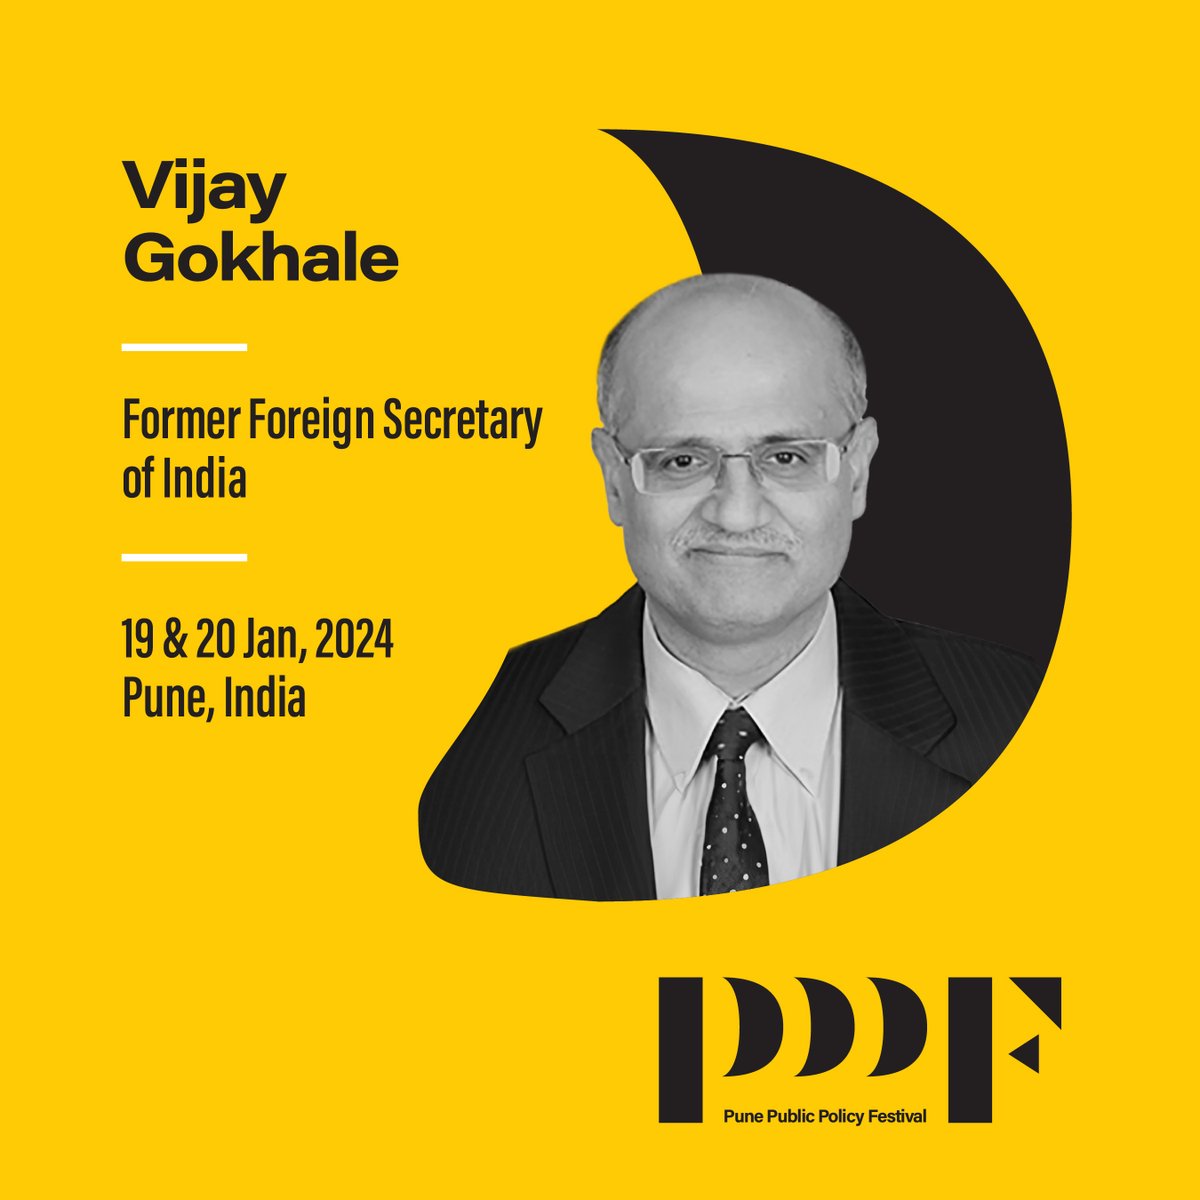 #MeetTheSpeaker

Vijay Keshav Gokhale IFS, distinguished former diplomat, served as the Foreign Secretary of India during his illustrious 39 year diplomatic career. Before his role as Foreign Secretary, Mr. Gokhale held key positions, including India’s high commissioner to…